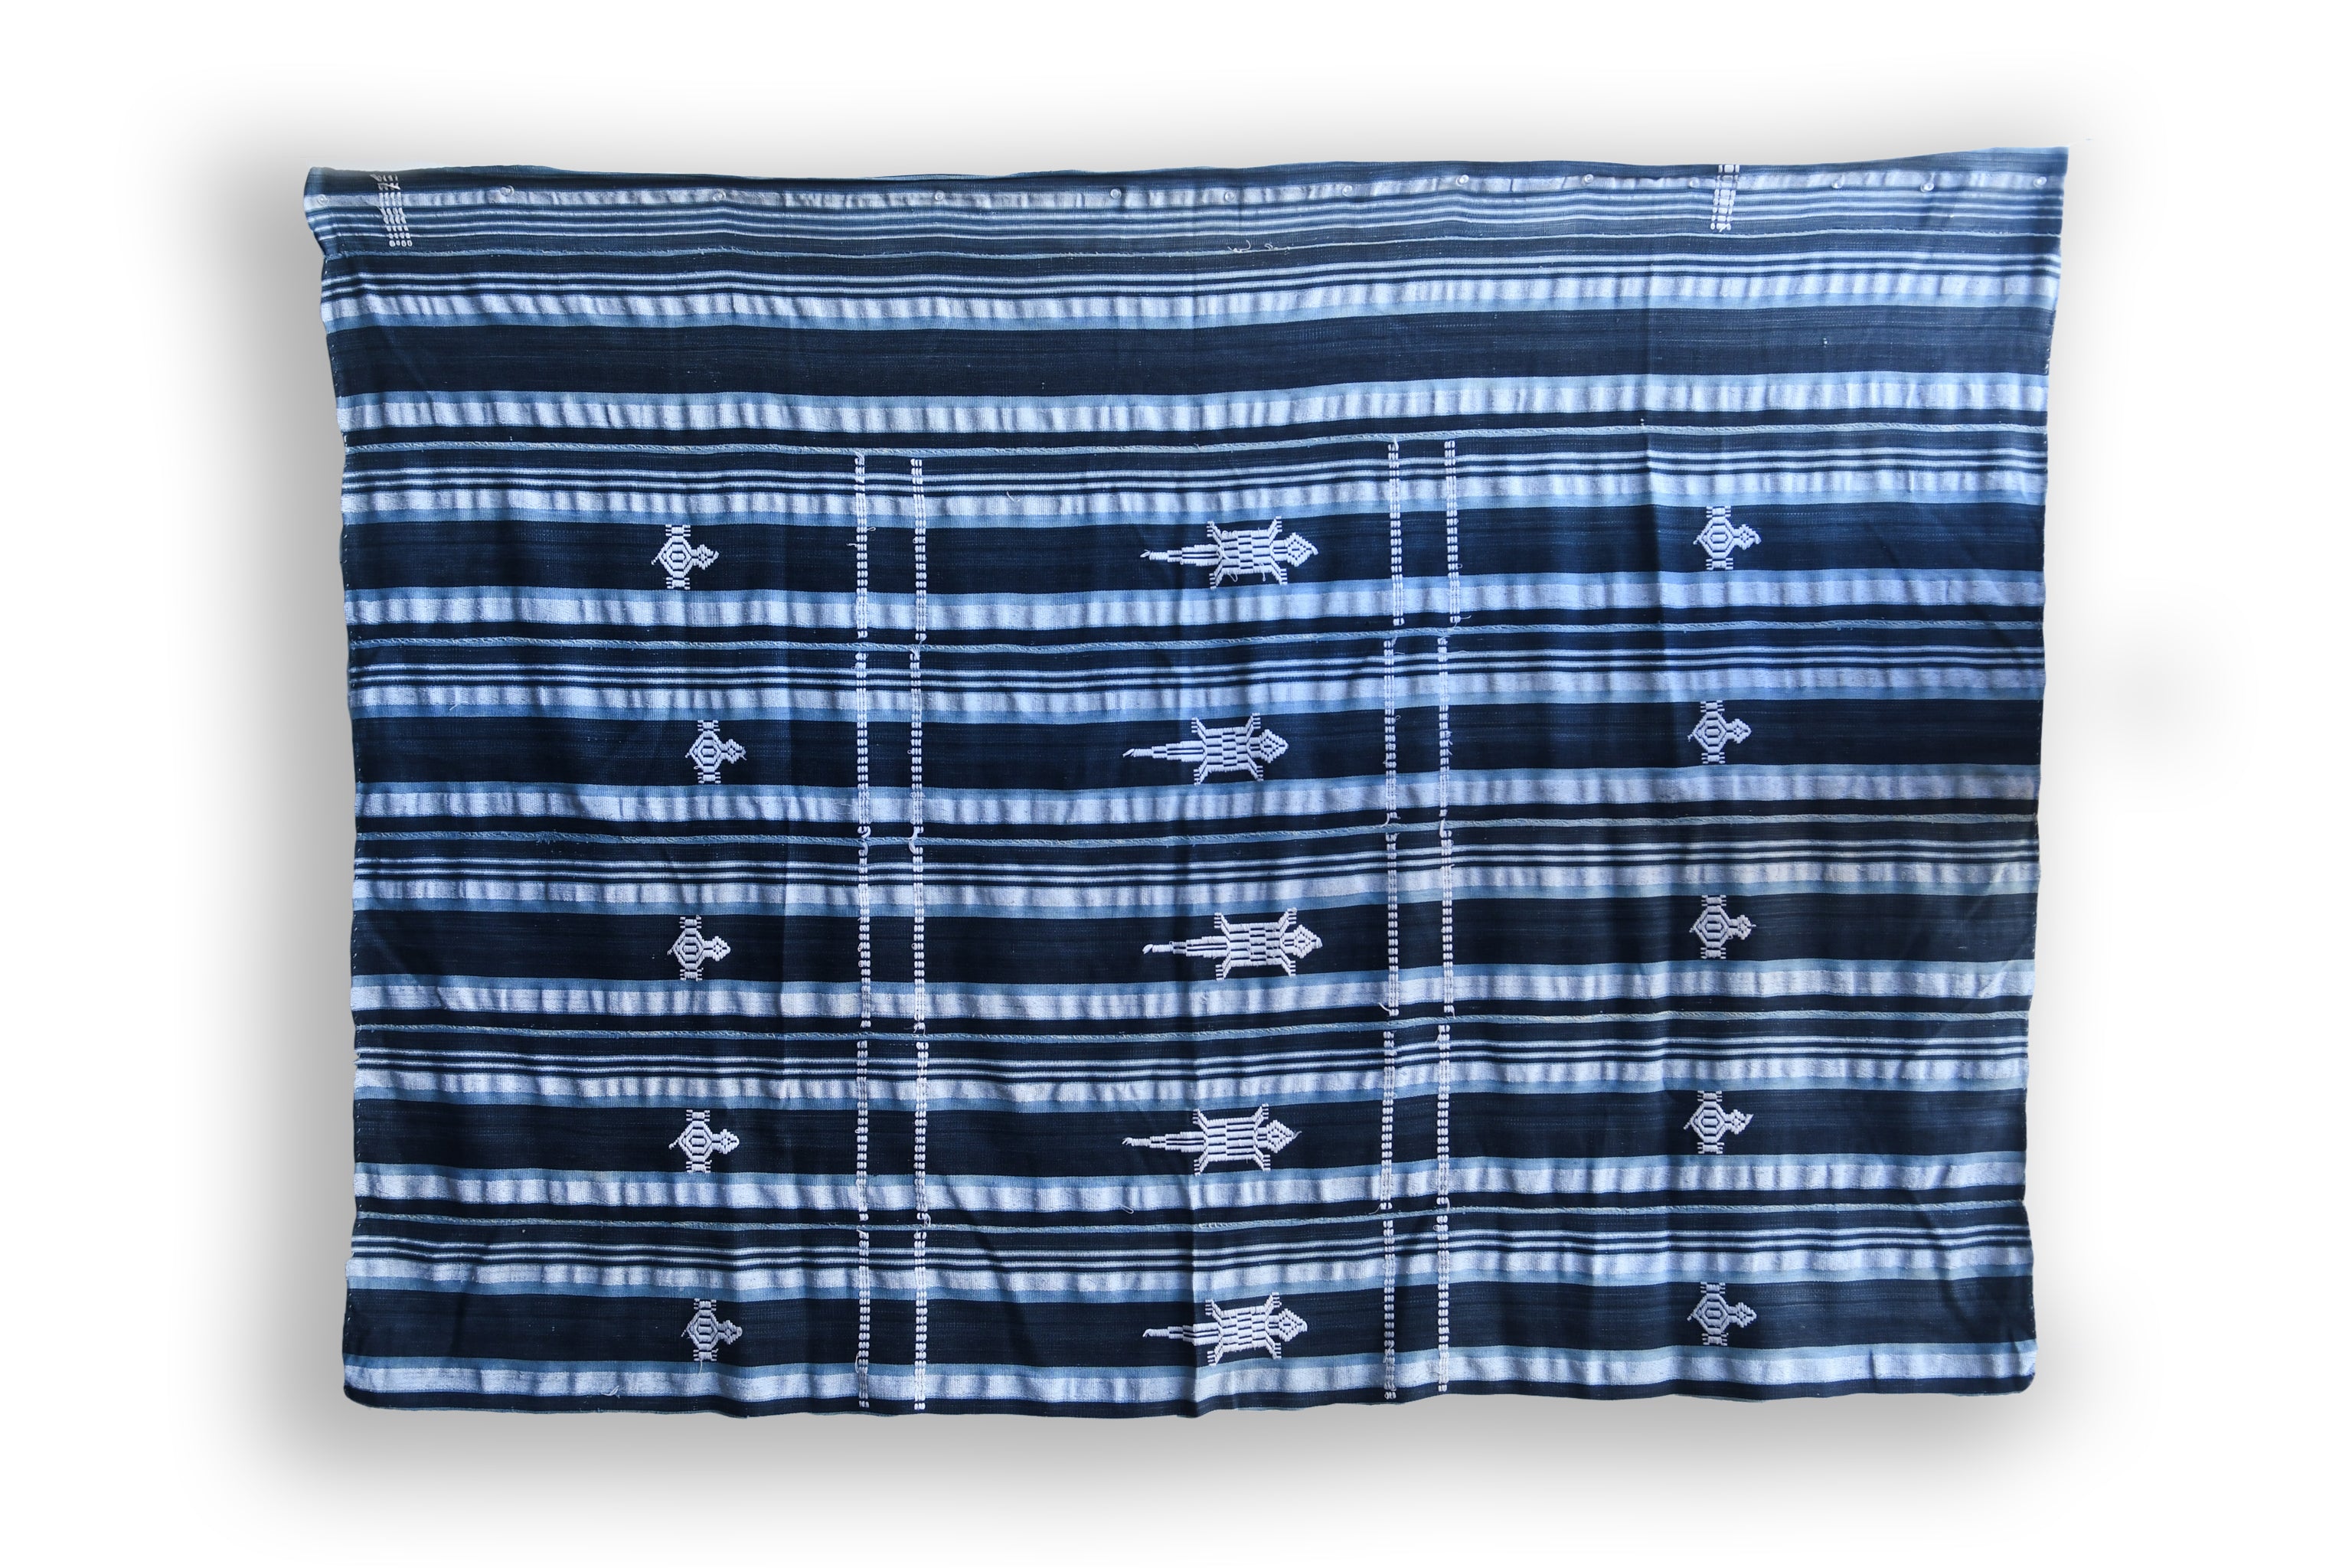 Handcrafted Textiles - Handmade - Contemporary - African Art - Home Decor - Living - Dyed Indigo - Stripe Woven Embroidered Fabric - Blue White Cotton Textile - Vintage Mudcloth Embroidery - African Inspired Home Decor - Blankets - Tapestries - 100% Cotton Material - Crafting Sewing Projects - Upholstery - Clothing